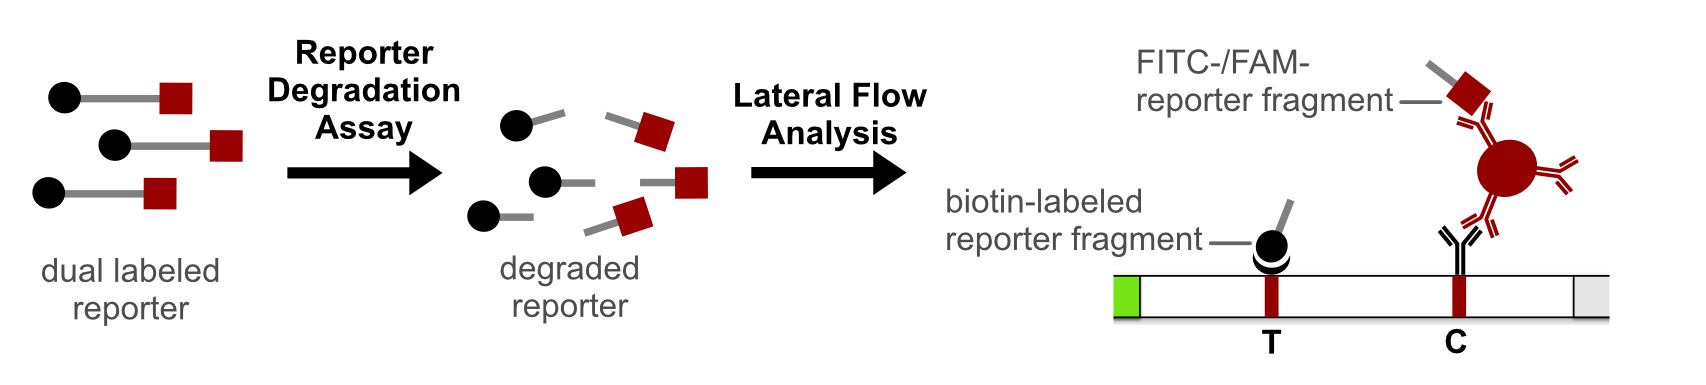 Reporter Degradation Lateral Flow Strategy